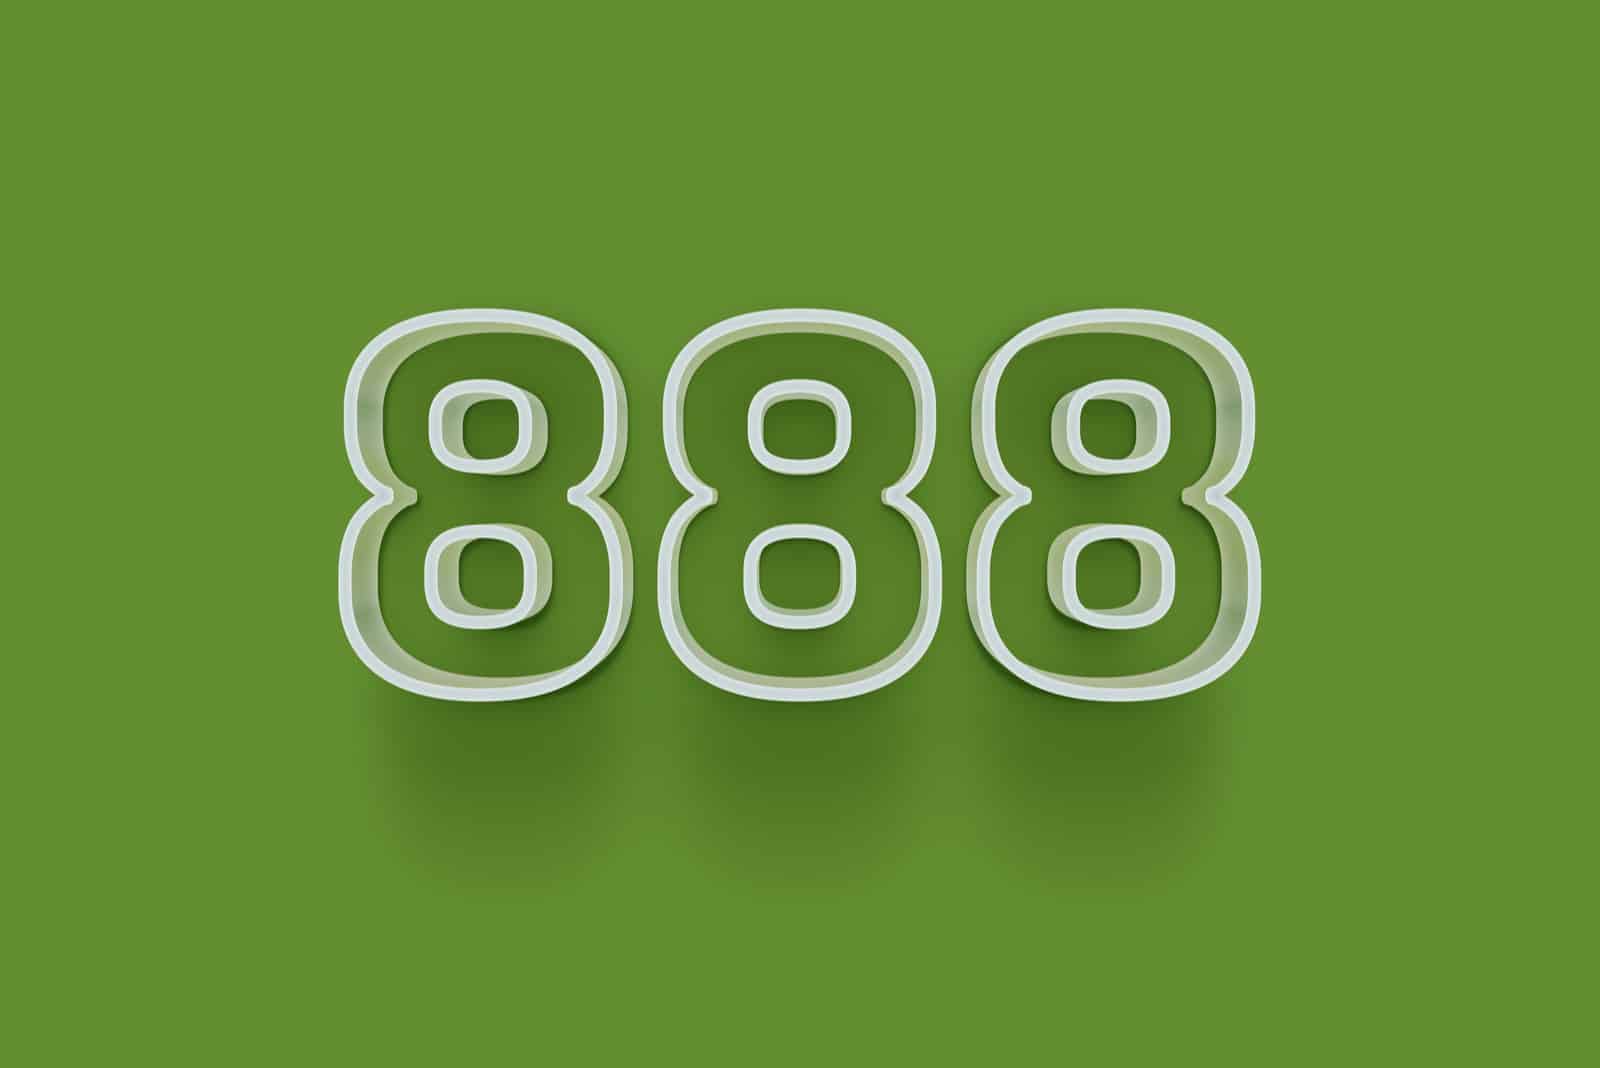 number 888 on green background